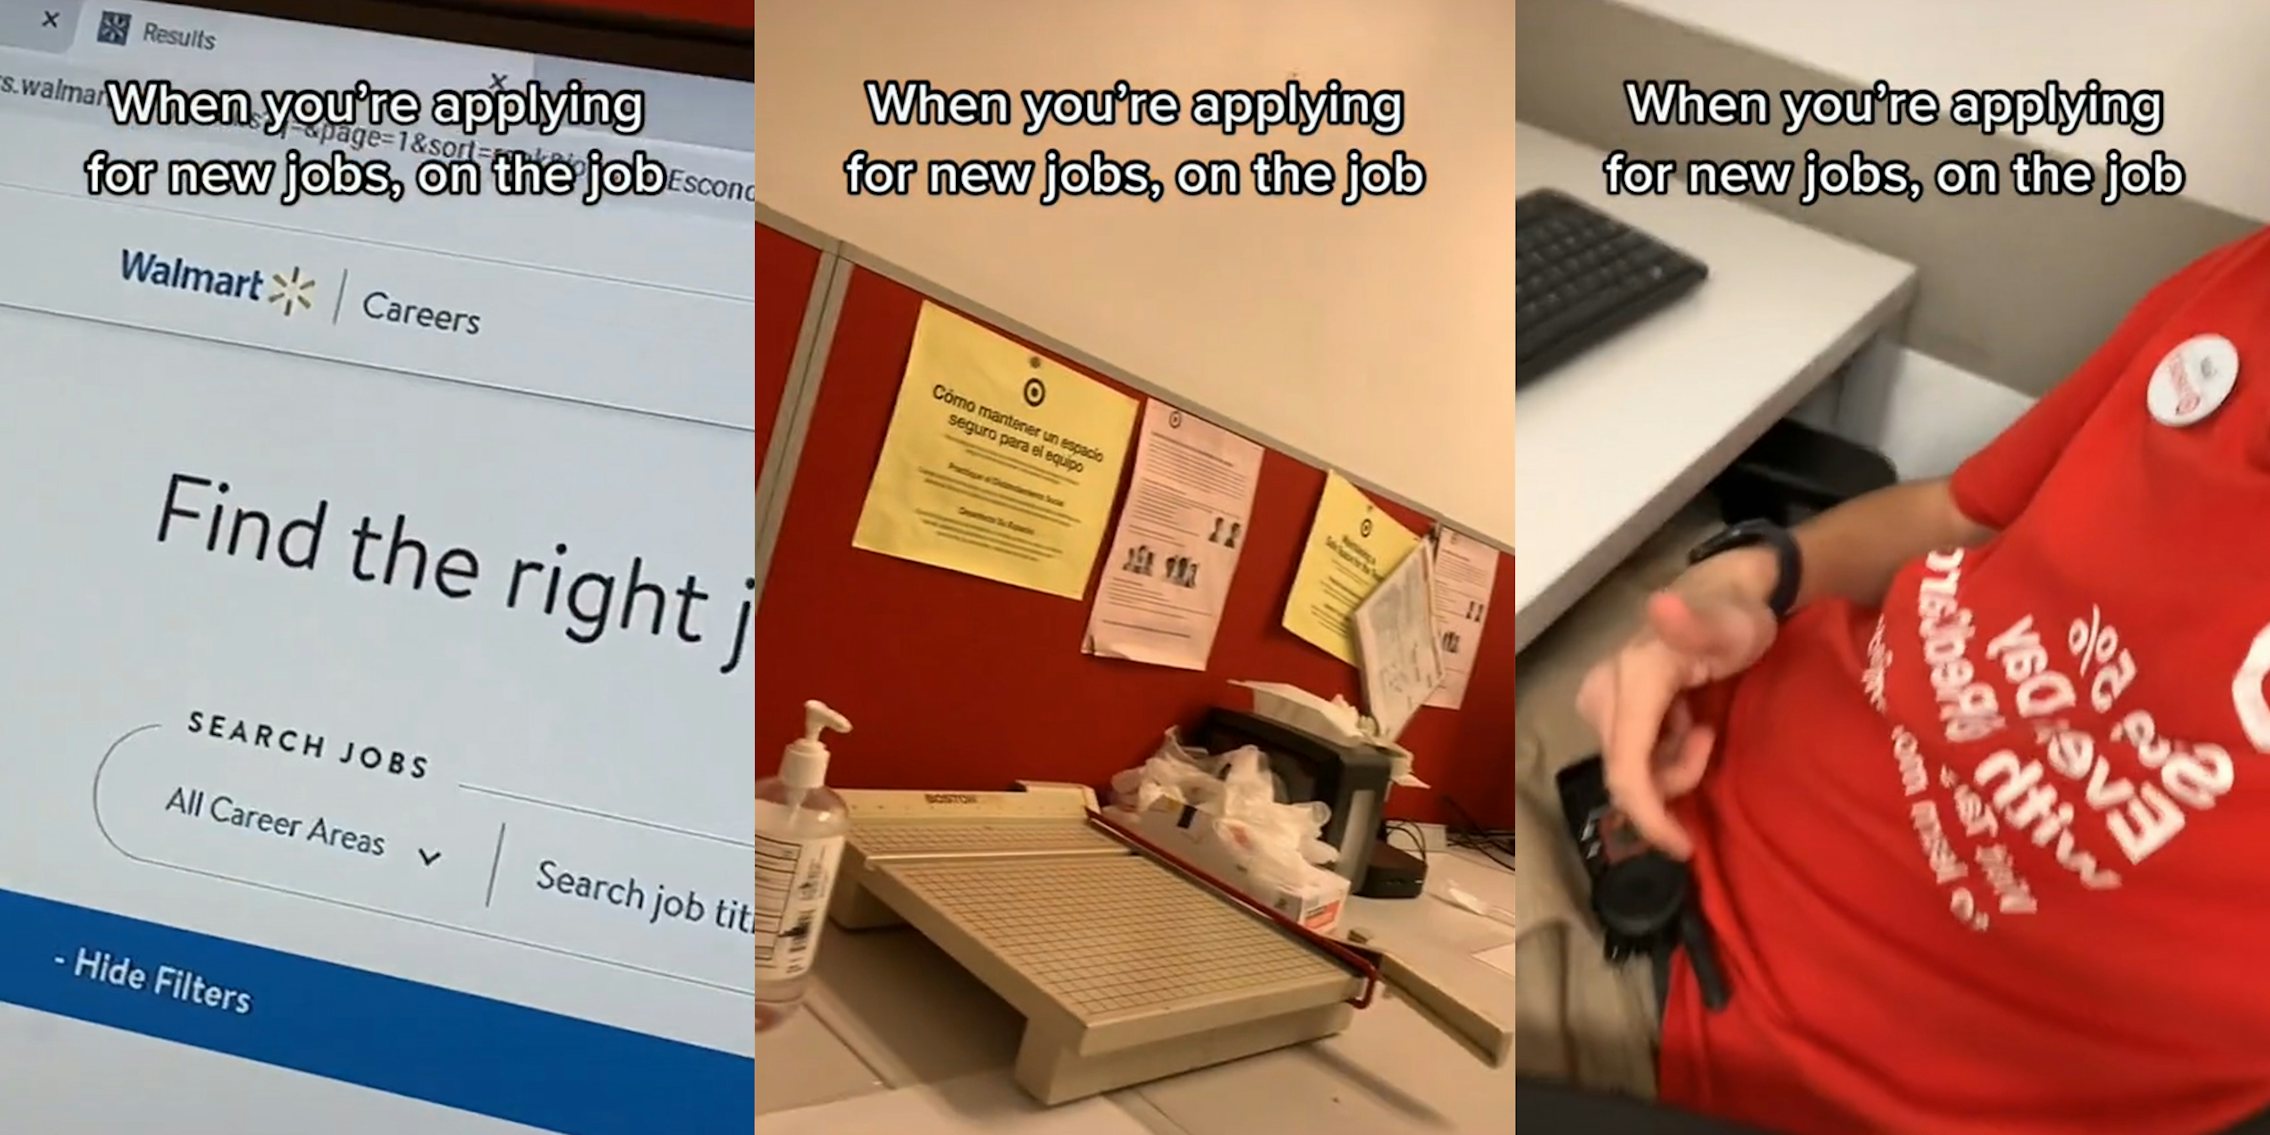 walmart careers webpage (l) target breakroom (c) target employee in chair at computer (r) all with caption 'When you're applying for new jobs, on the job'